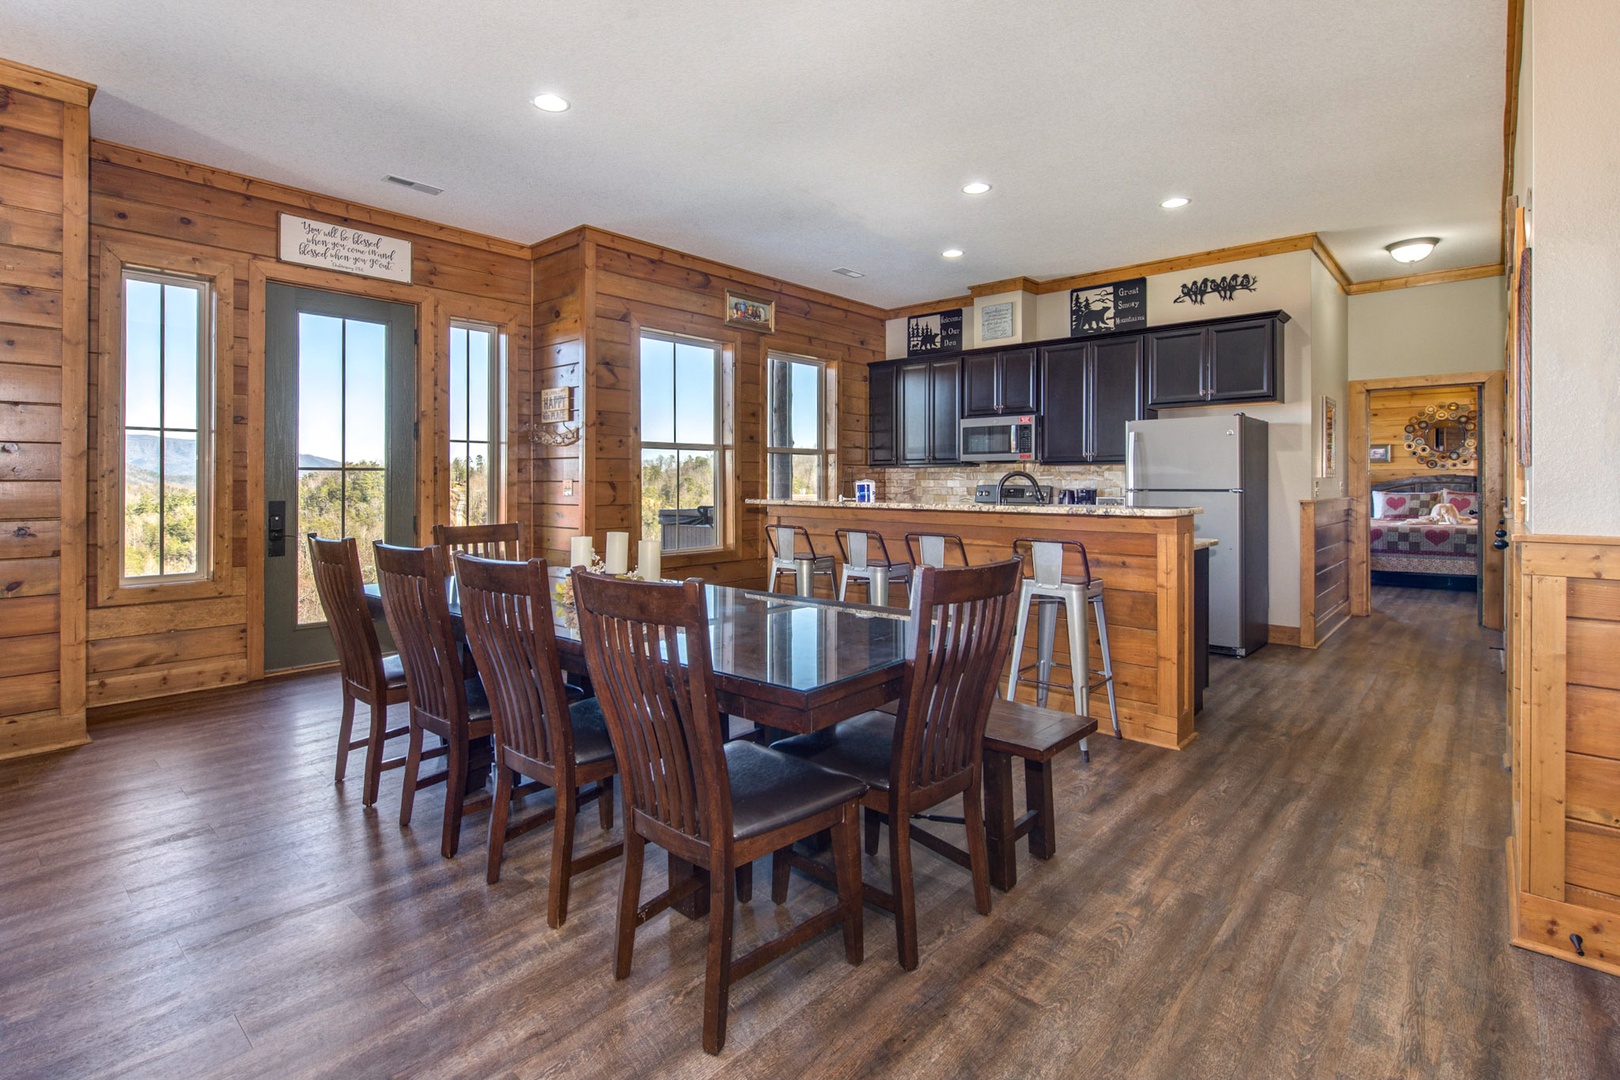 The entire family can gather for meals together in the open dining room